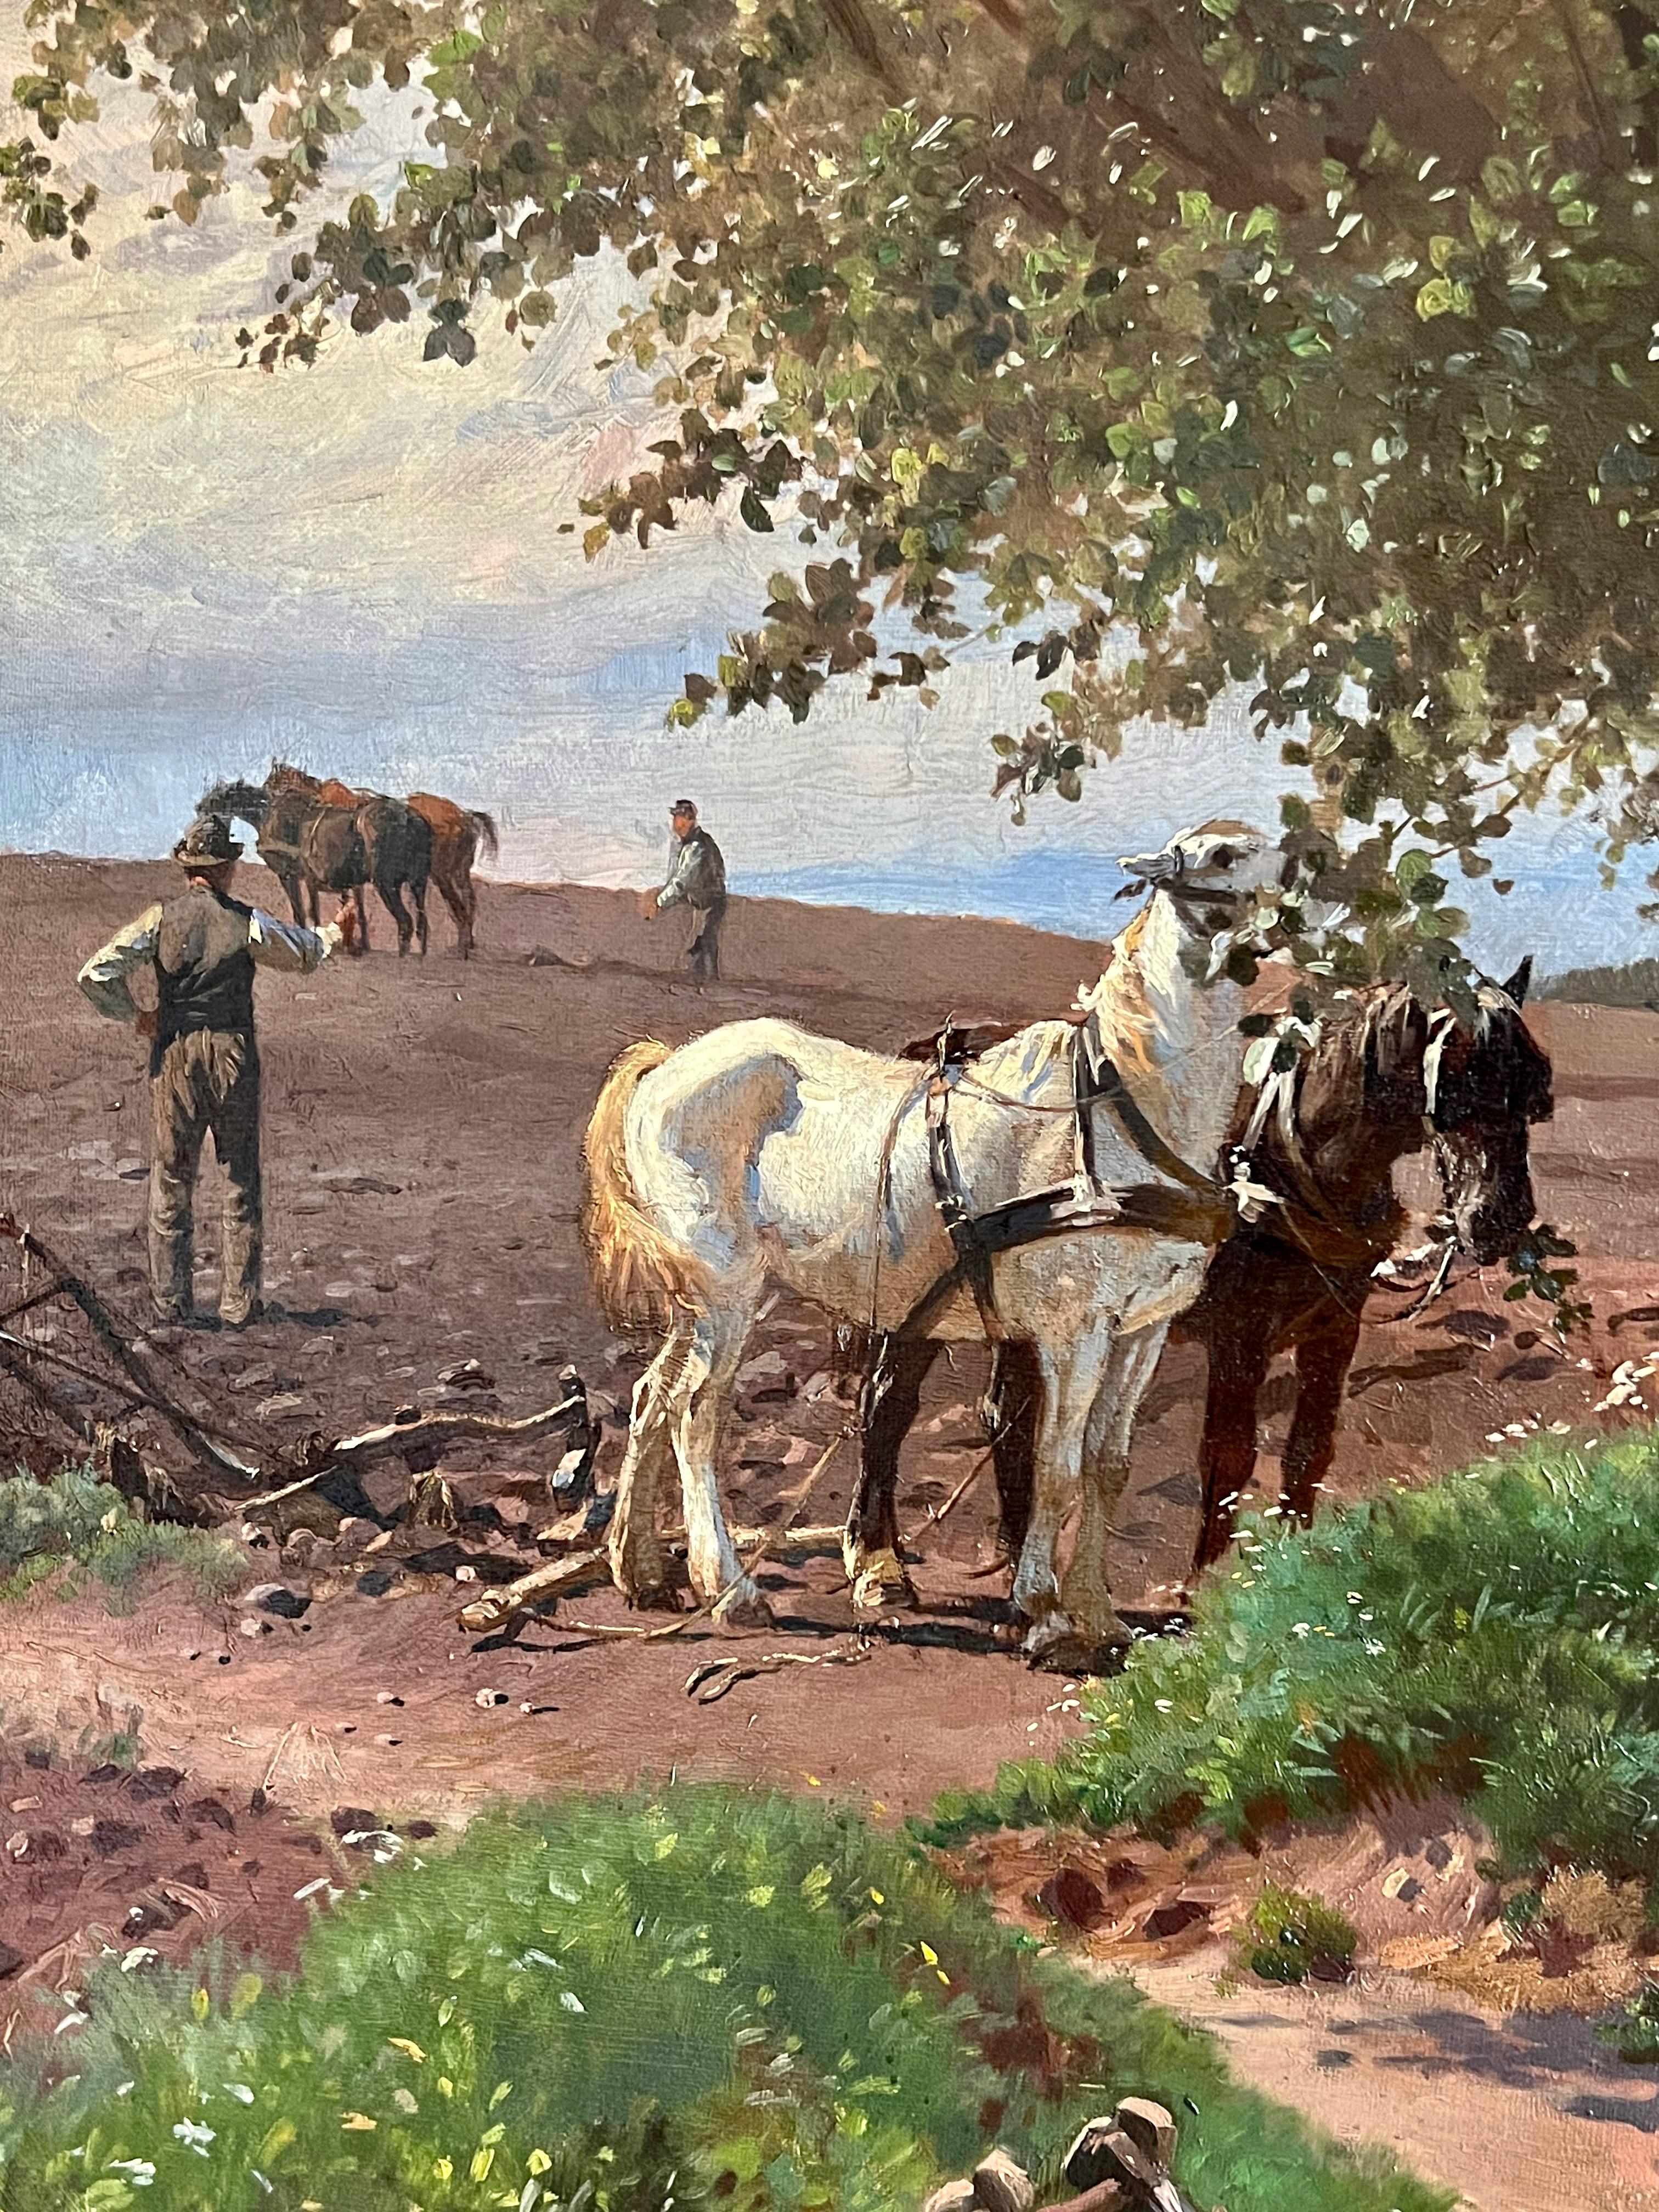 Frants Henningsen, Landscape with Horses Resting and People Working on the Field - Naturalistic Painting by Frants Henningsen 